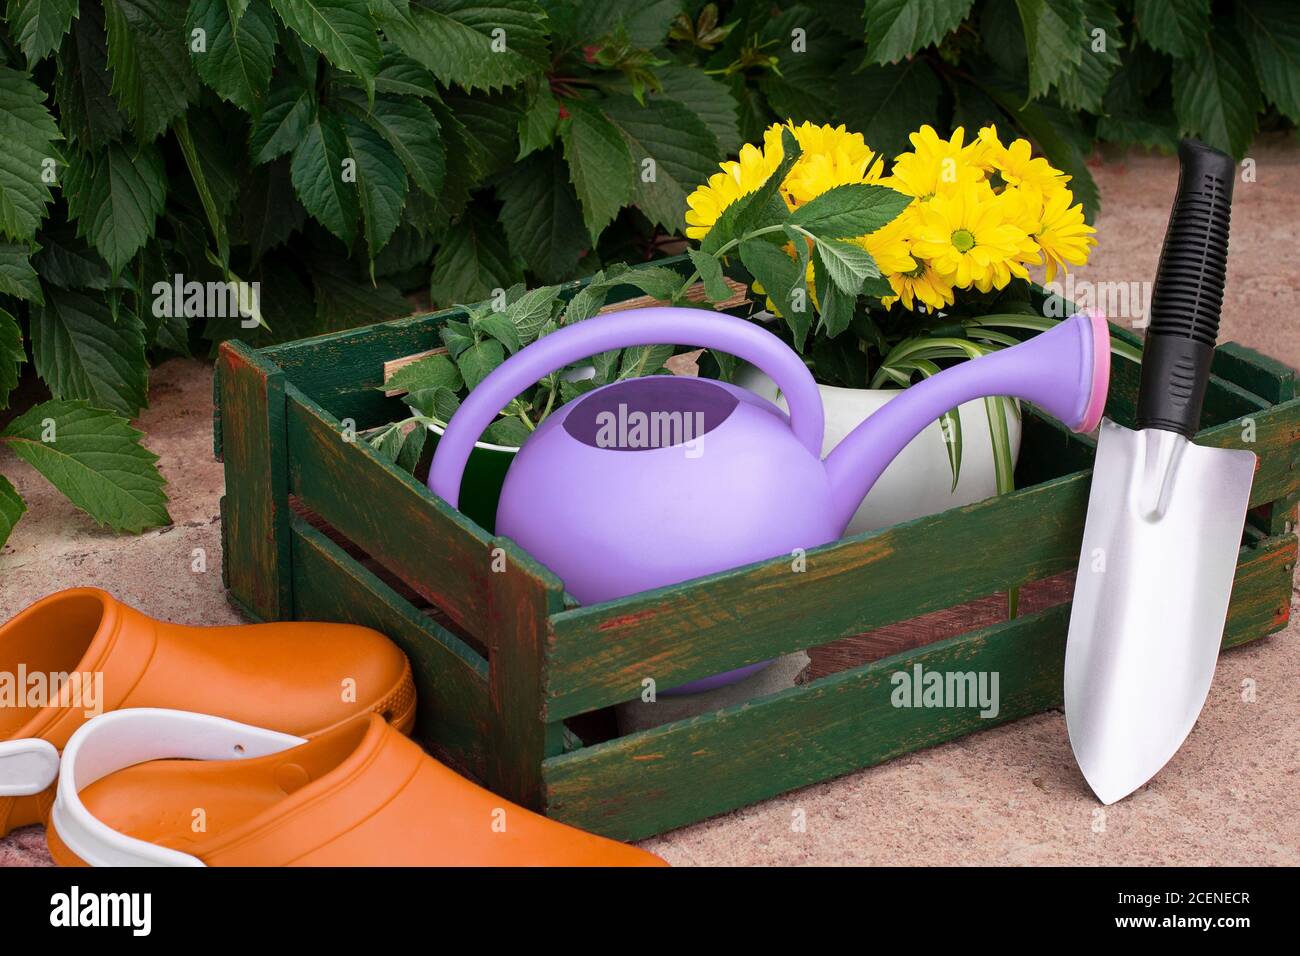 Gardening. work in the garden. tools, watering can and flower in a pot on a background of green leaves. Copy space. Wild grapes. Stock Photo